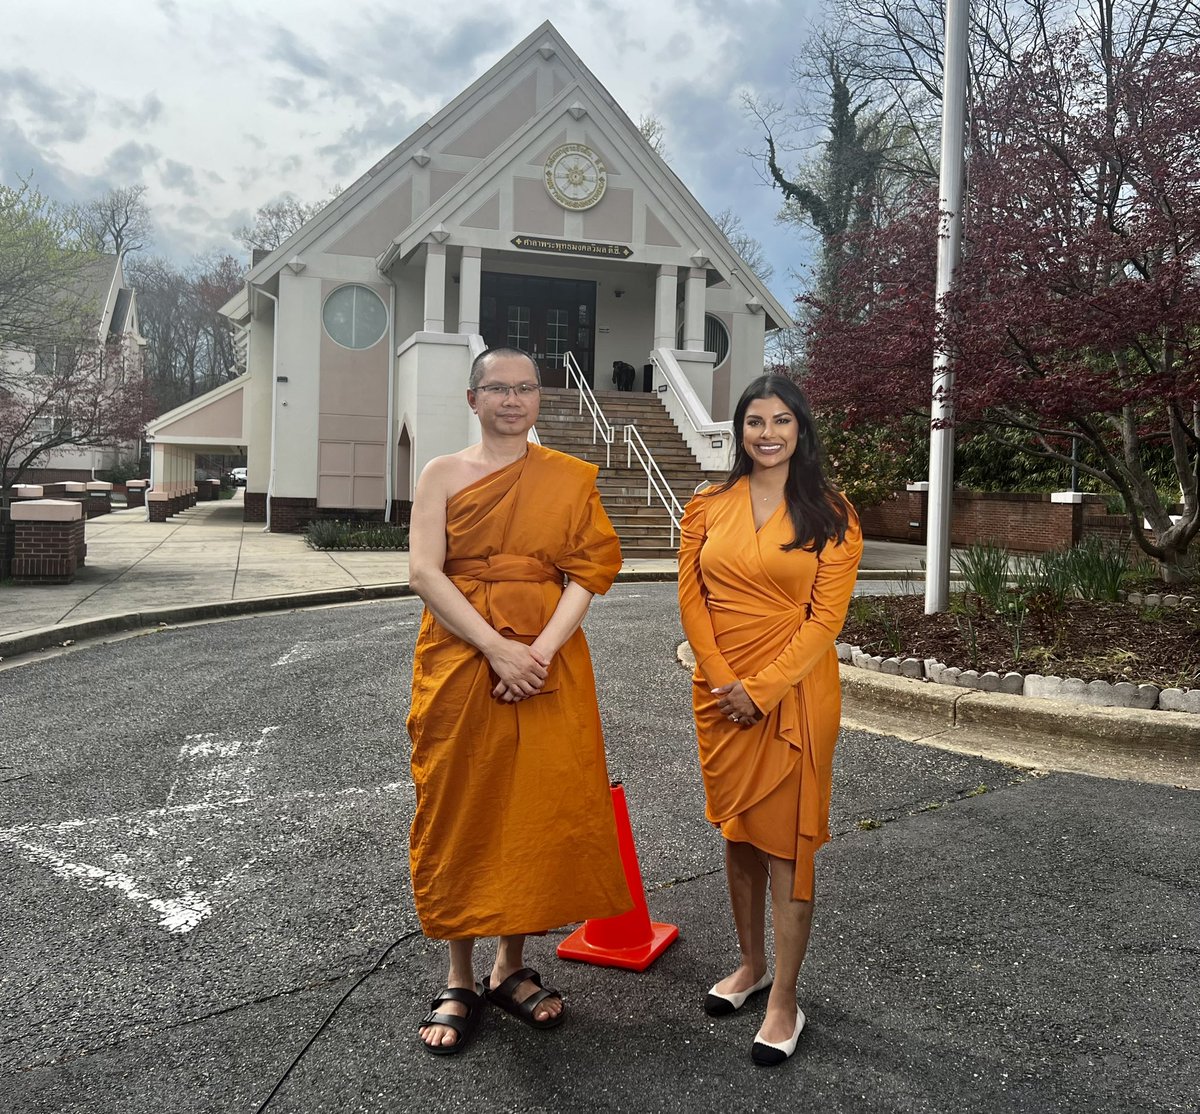 showed up to my story at a Buddhist temple accidentally dressed like a monk today and the monk thought this was the funniest thing ever so now we have 3000 photos to prove he wore it better. i love my job.